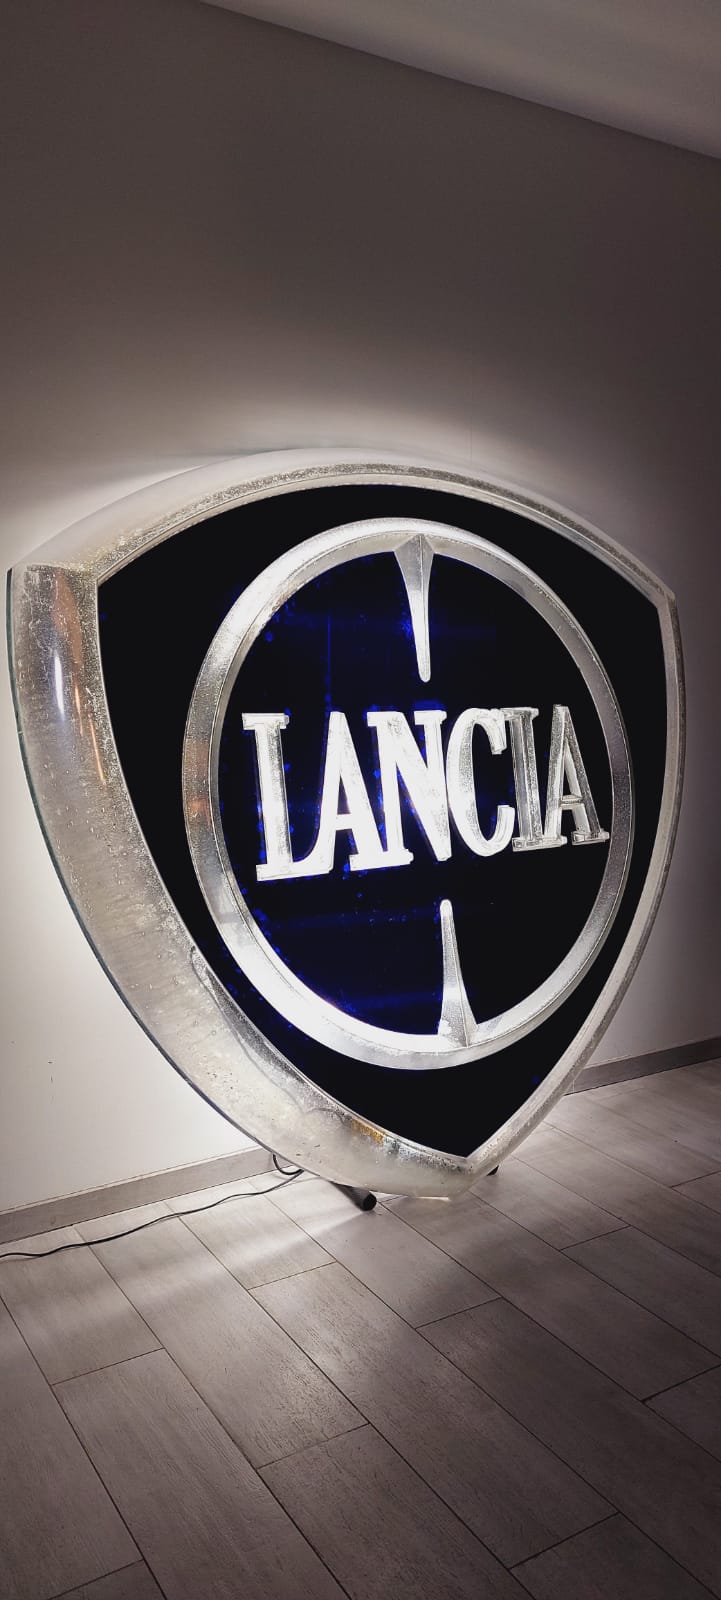 1990s Lancia official dealer large illuminated sign